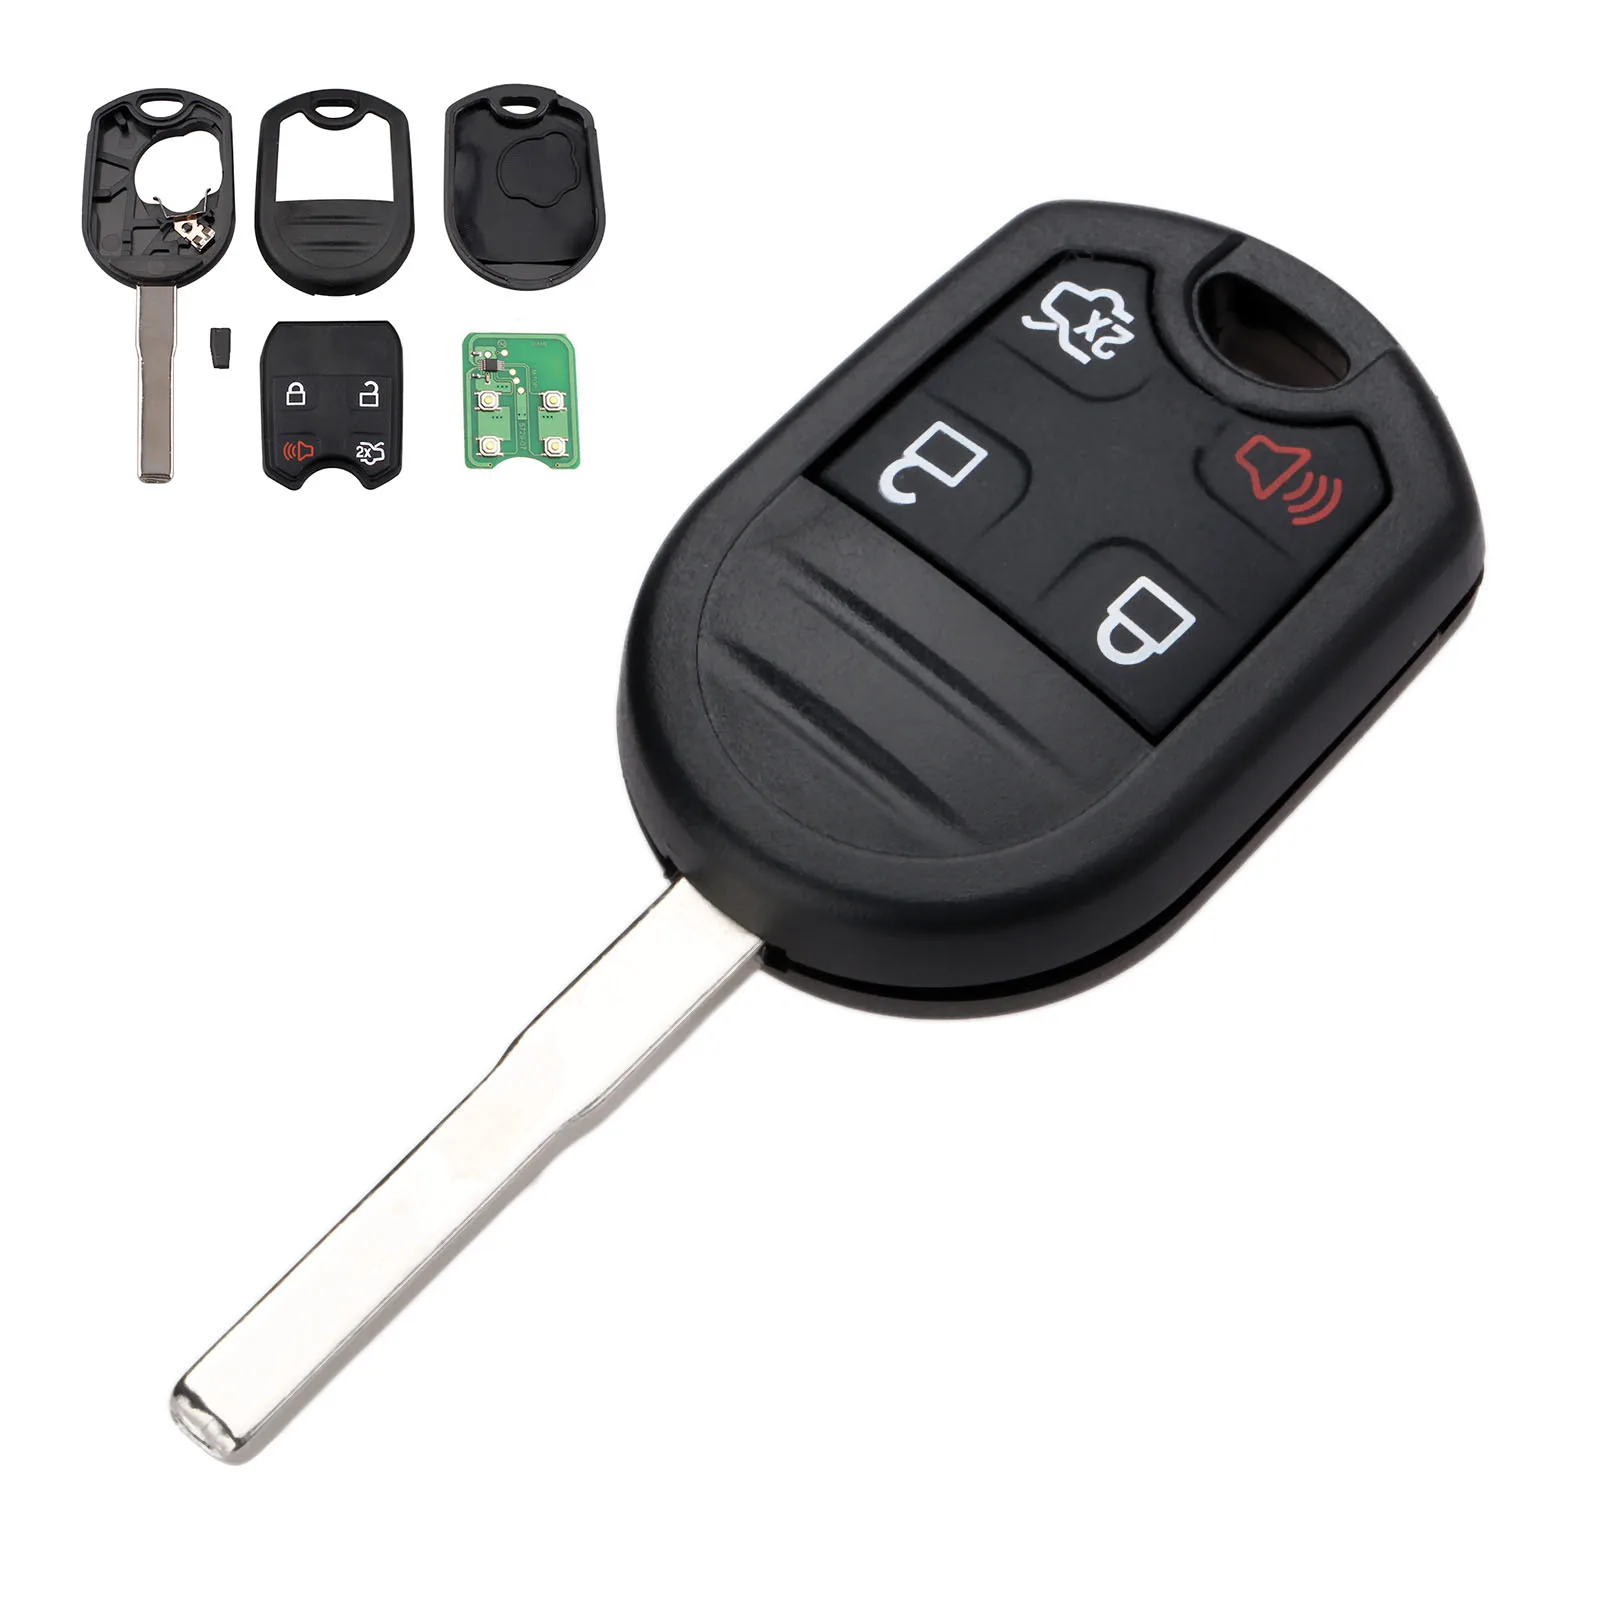 

CWTWB1U793 4-Buttons Remote Car Key Fob for Ford Escape Fiesta Focus Transit Connect C-Max 2014-2016 ID83/4D63 Chip 80Bit 315MHz